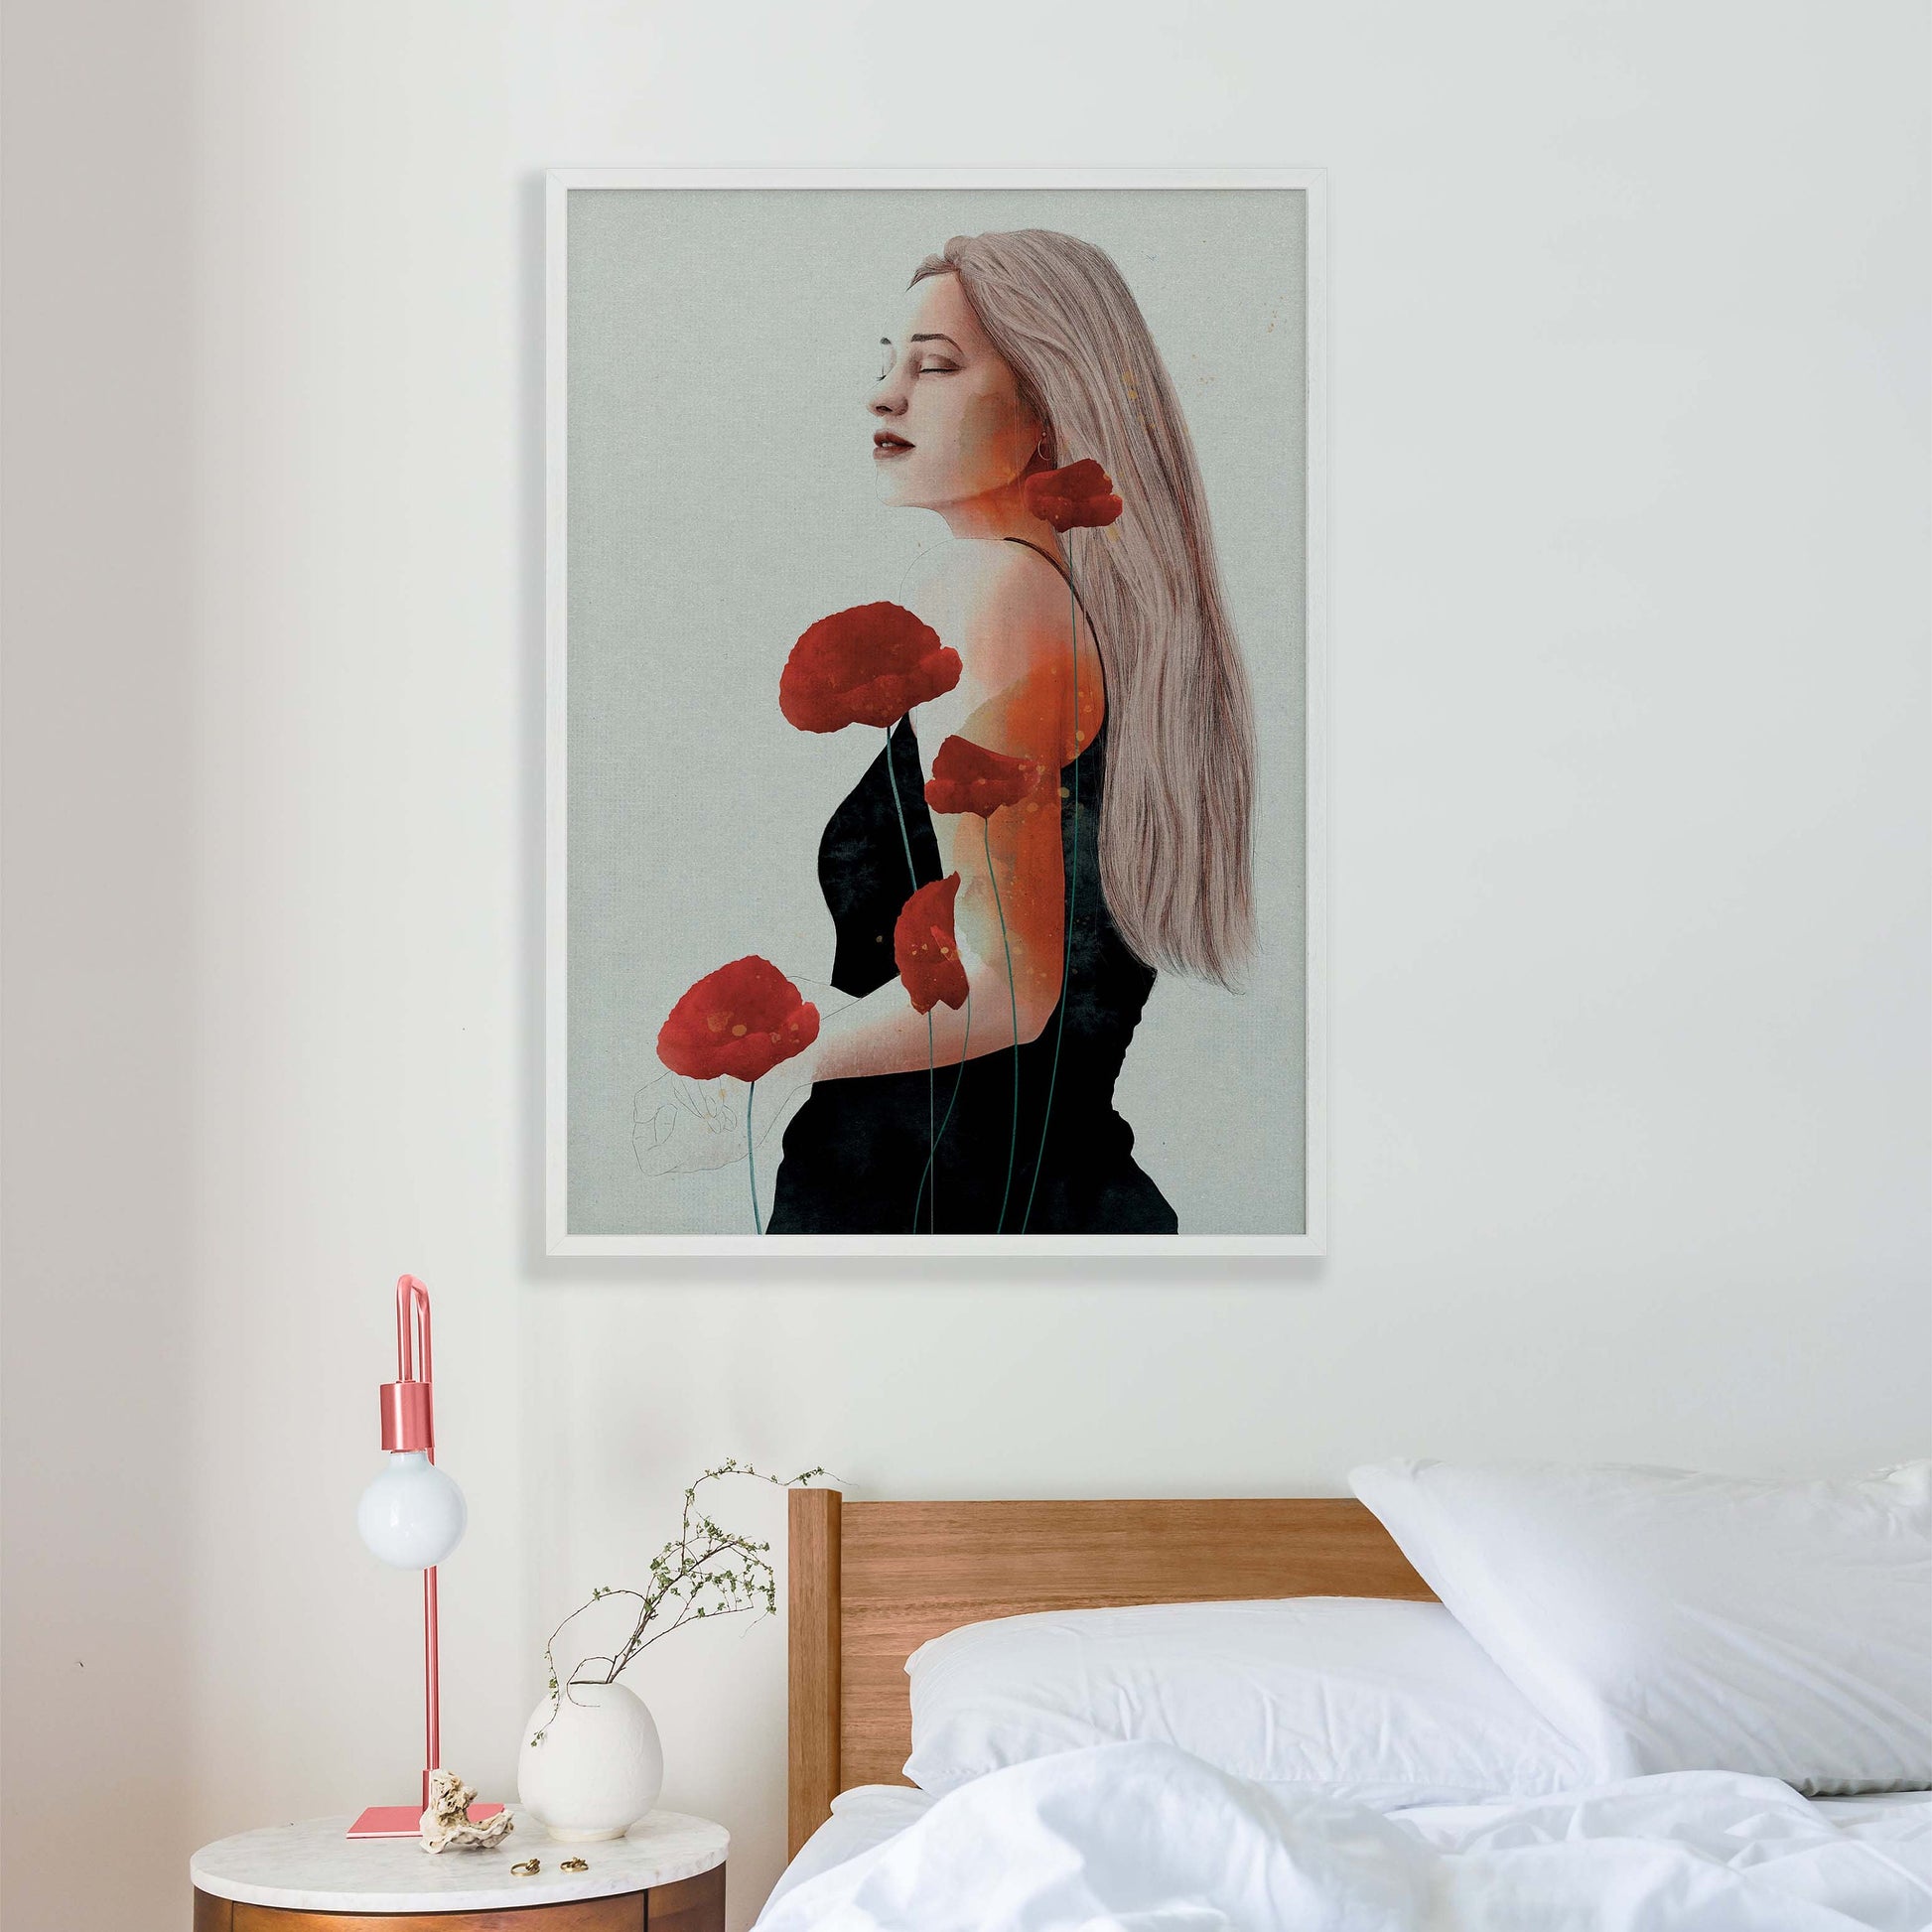 Woman in black dress with red poppy art print in white frame in bedroom